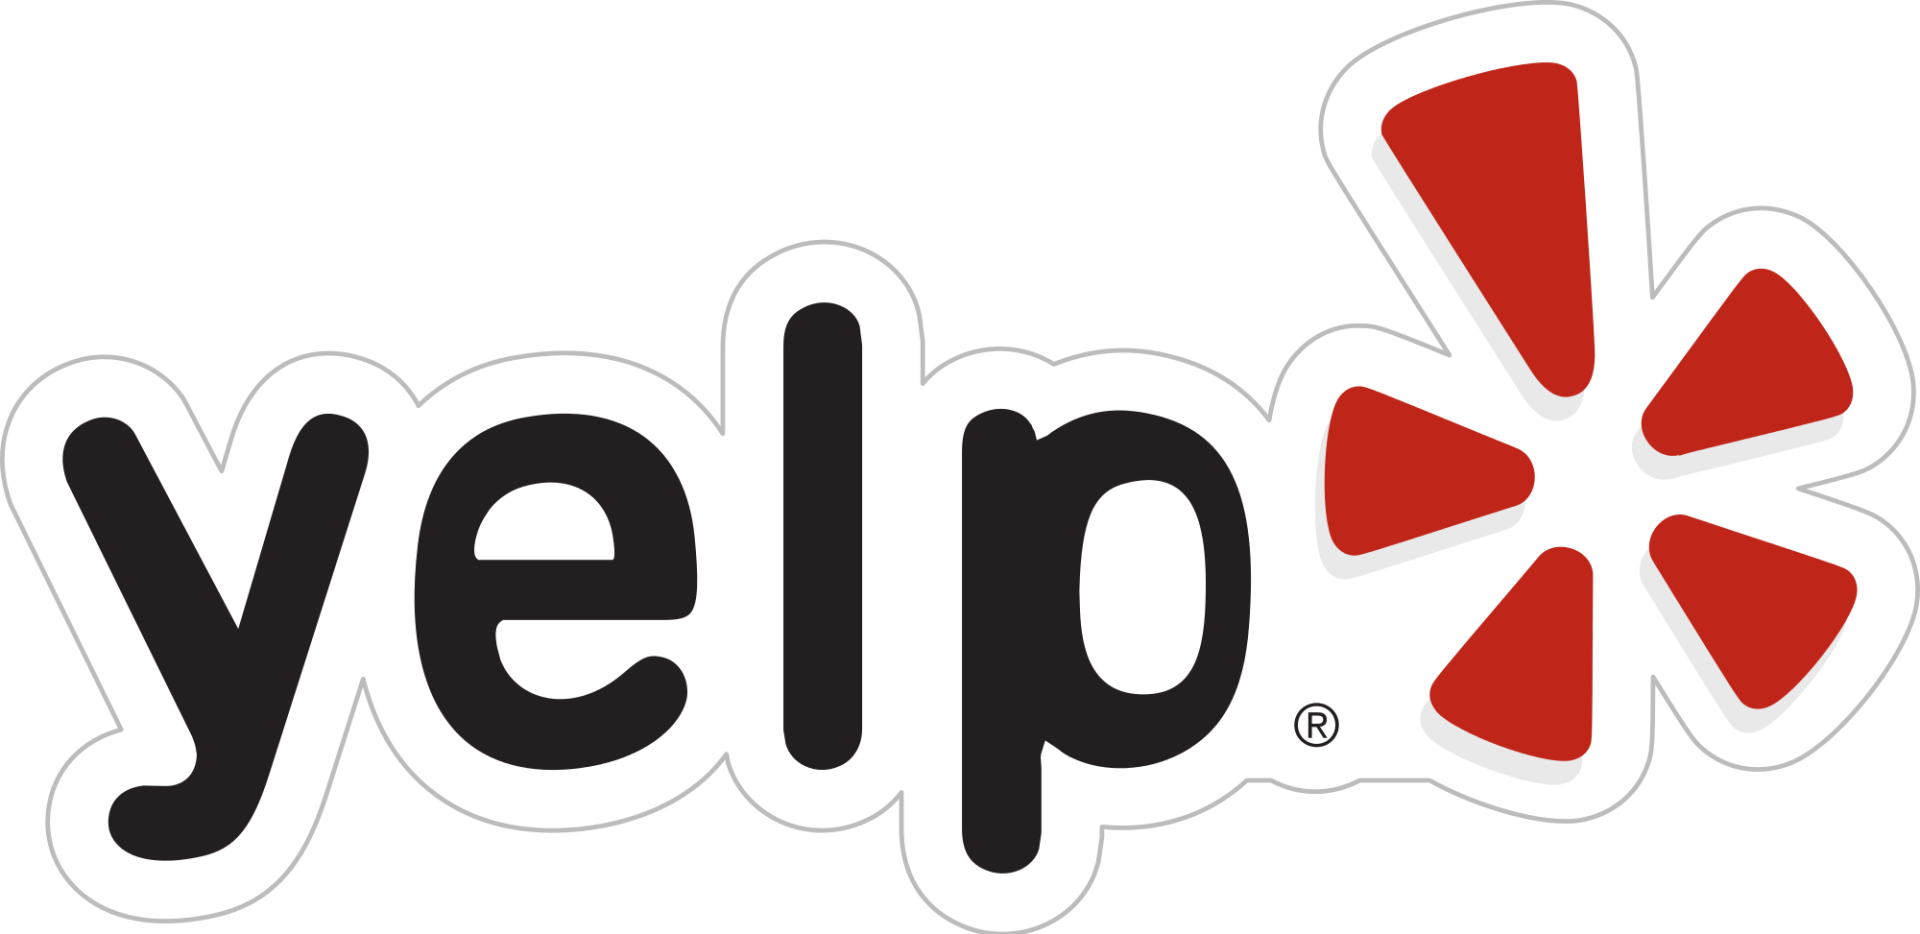 Greg Dunn debt relief attorney's yelp page